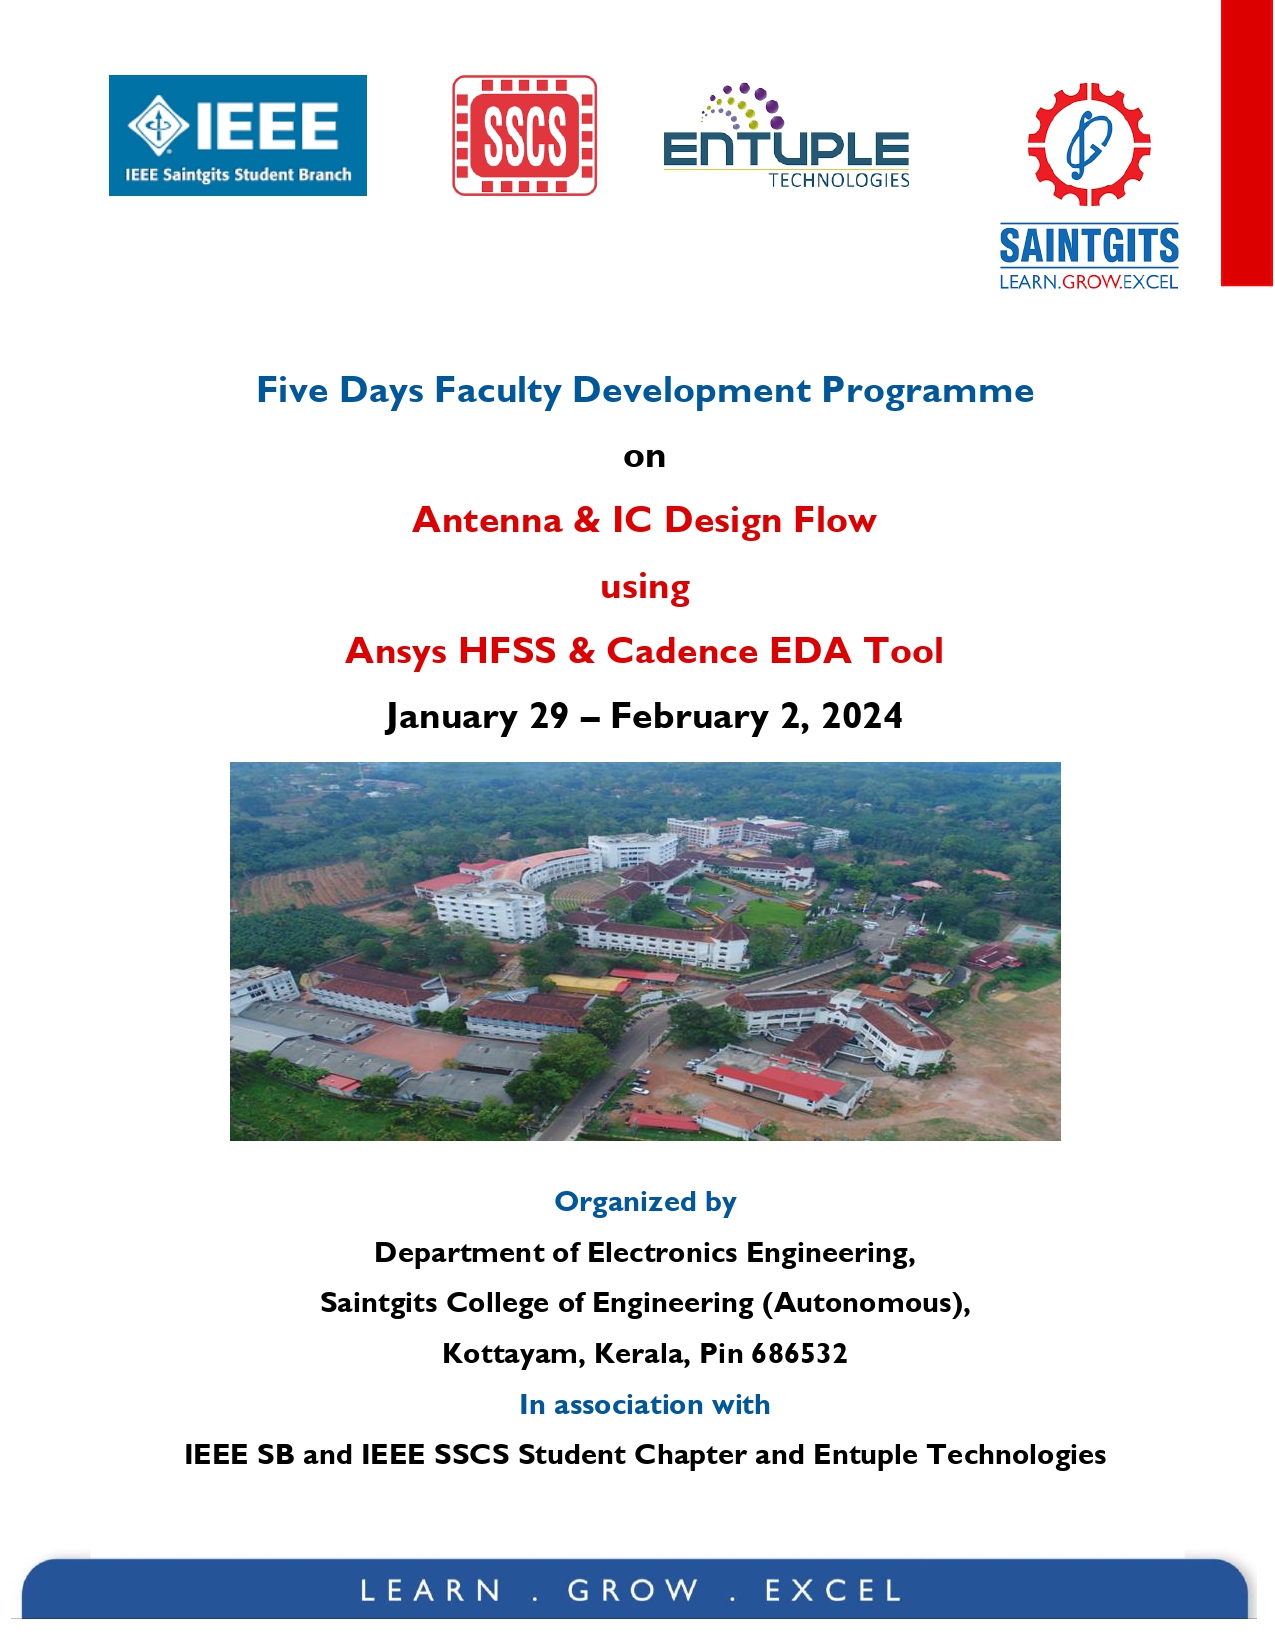 Five Day Faculty Development Programme (FDP) on Antenna and IC Design Flow using Ansys HFSS and Cadence EDA Tools 2024